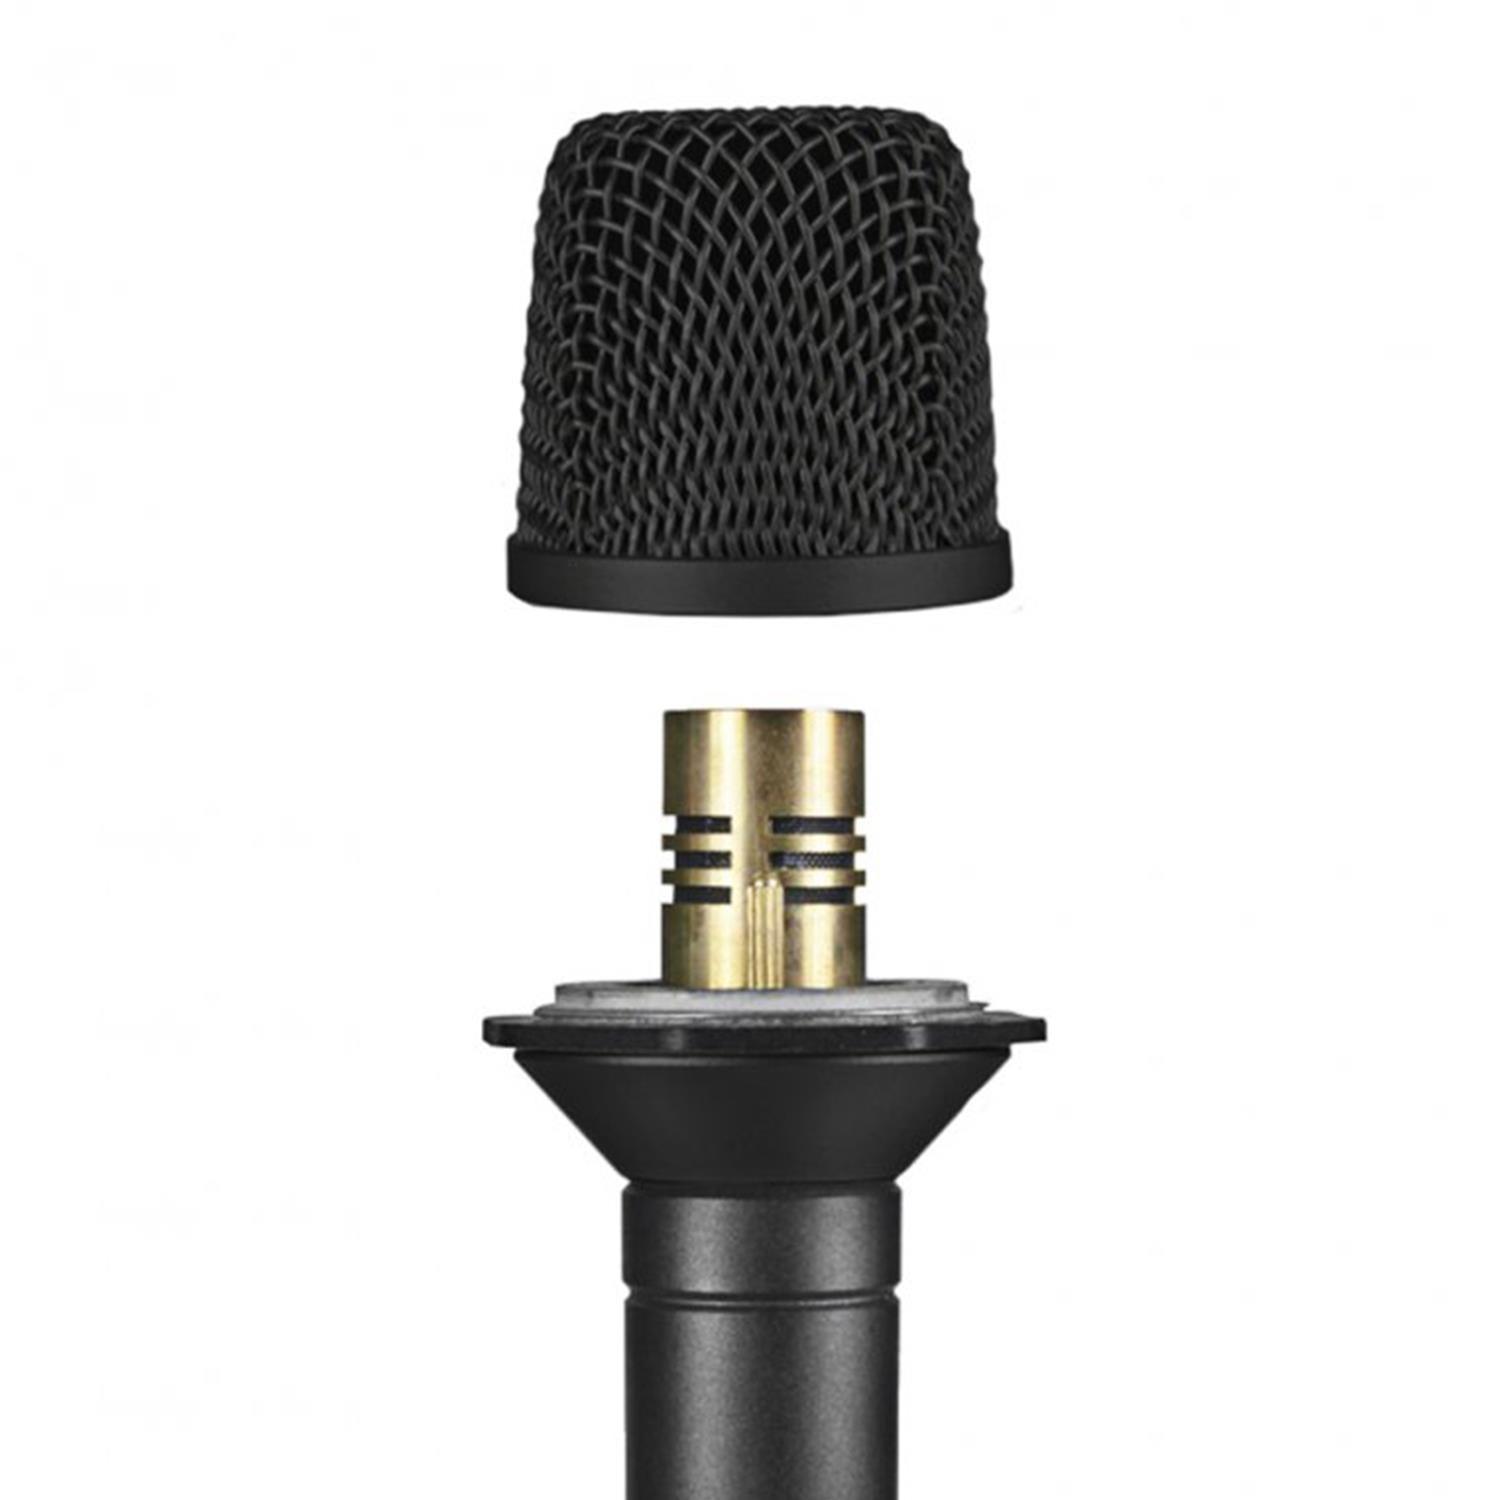 Stagg SCM300 Cardioid Electret Condenser Microphone - DY Pro Audio